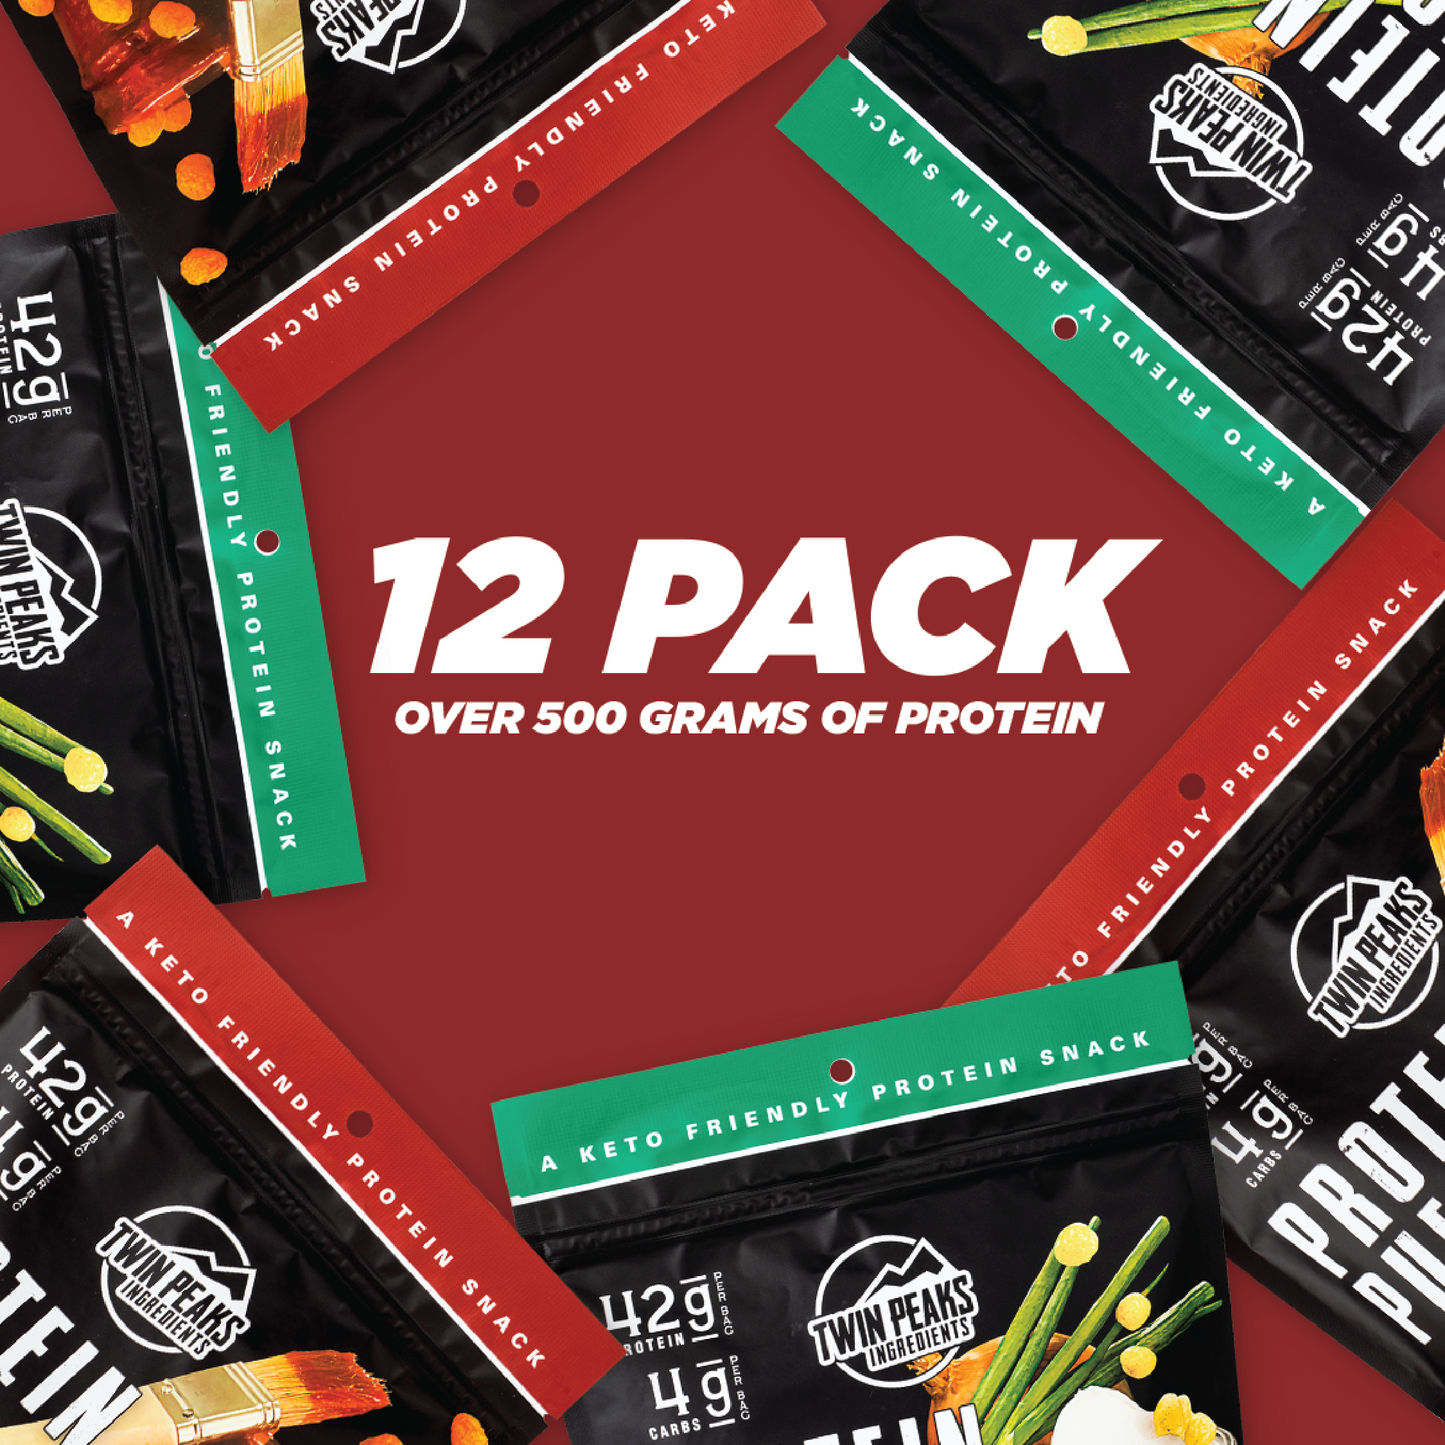 12 Pack - over 500 grams of protein